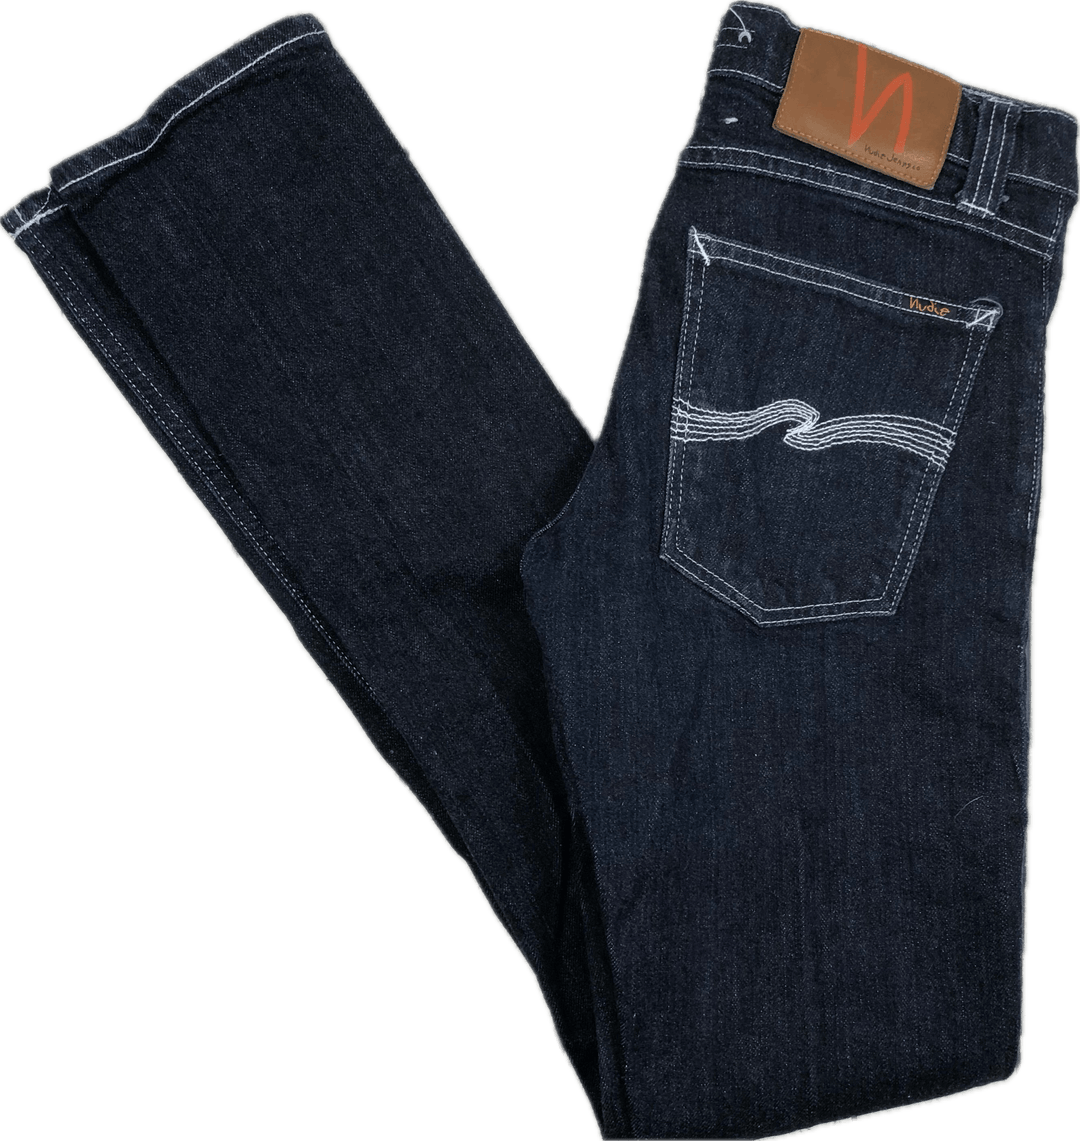 Nudie Jeans Co. 'Tight Long John' Organic Rinsed Jeans- Size 24 - Jean Pool